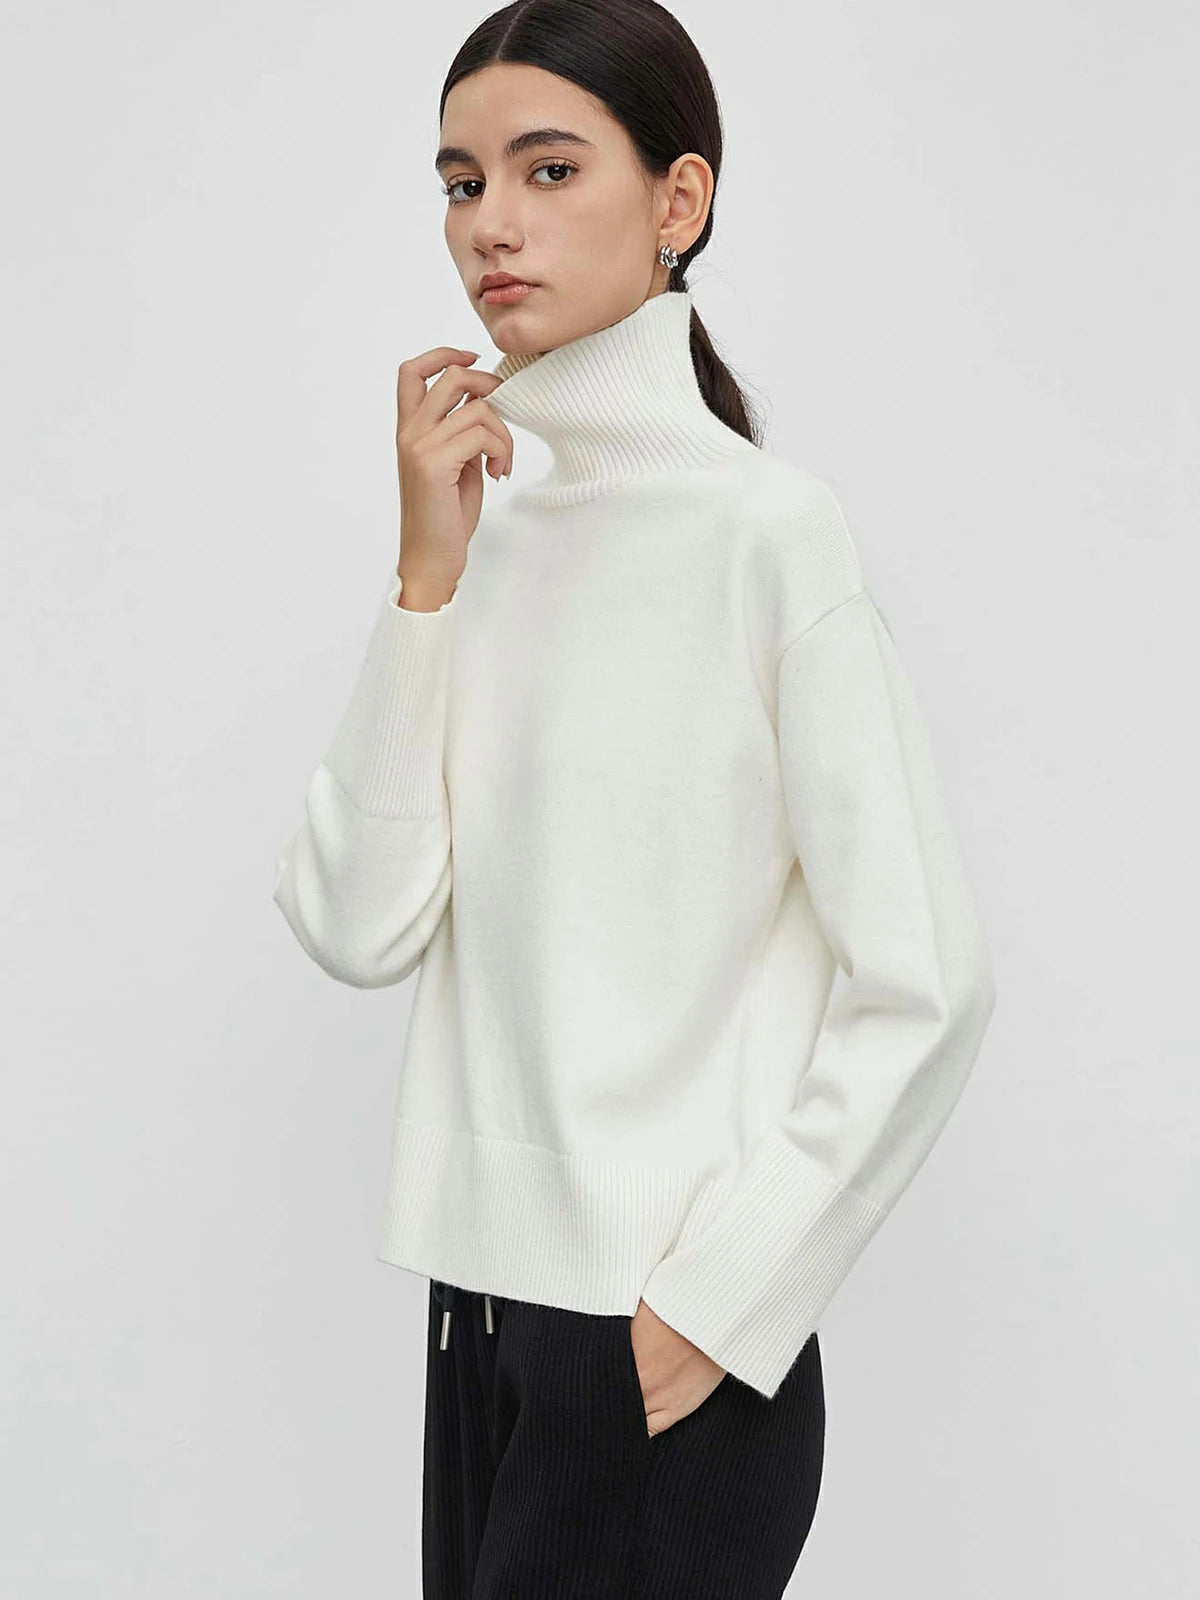 Versatile Ivory Turtleneck Sweater Featuring Chic Ribbed Texture